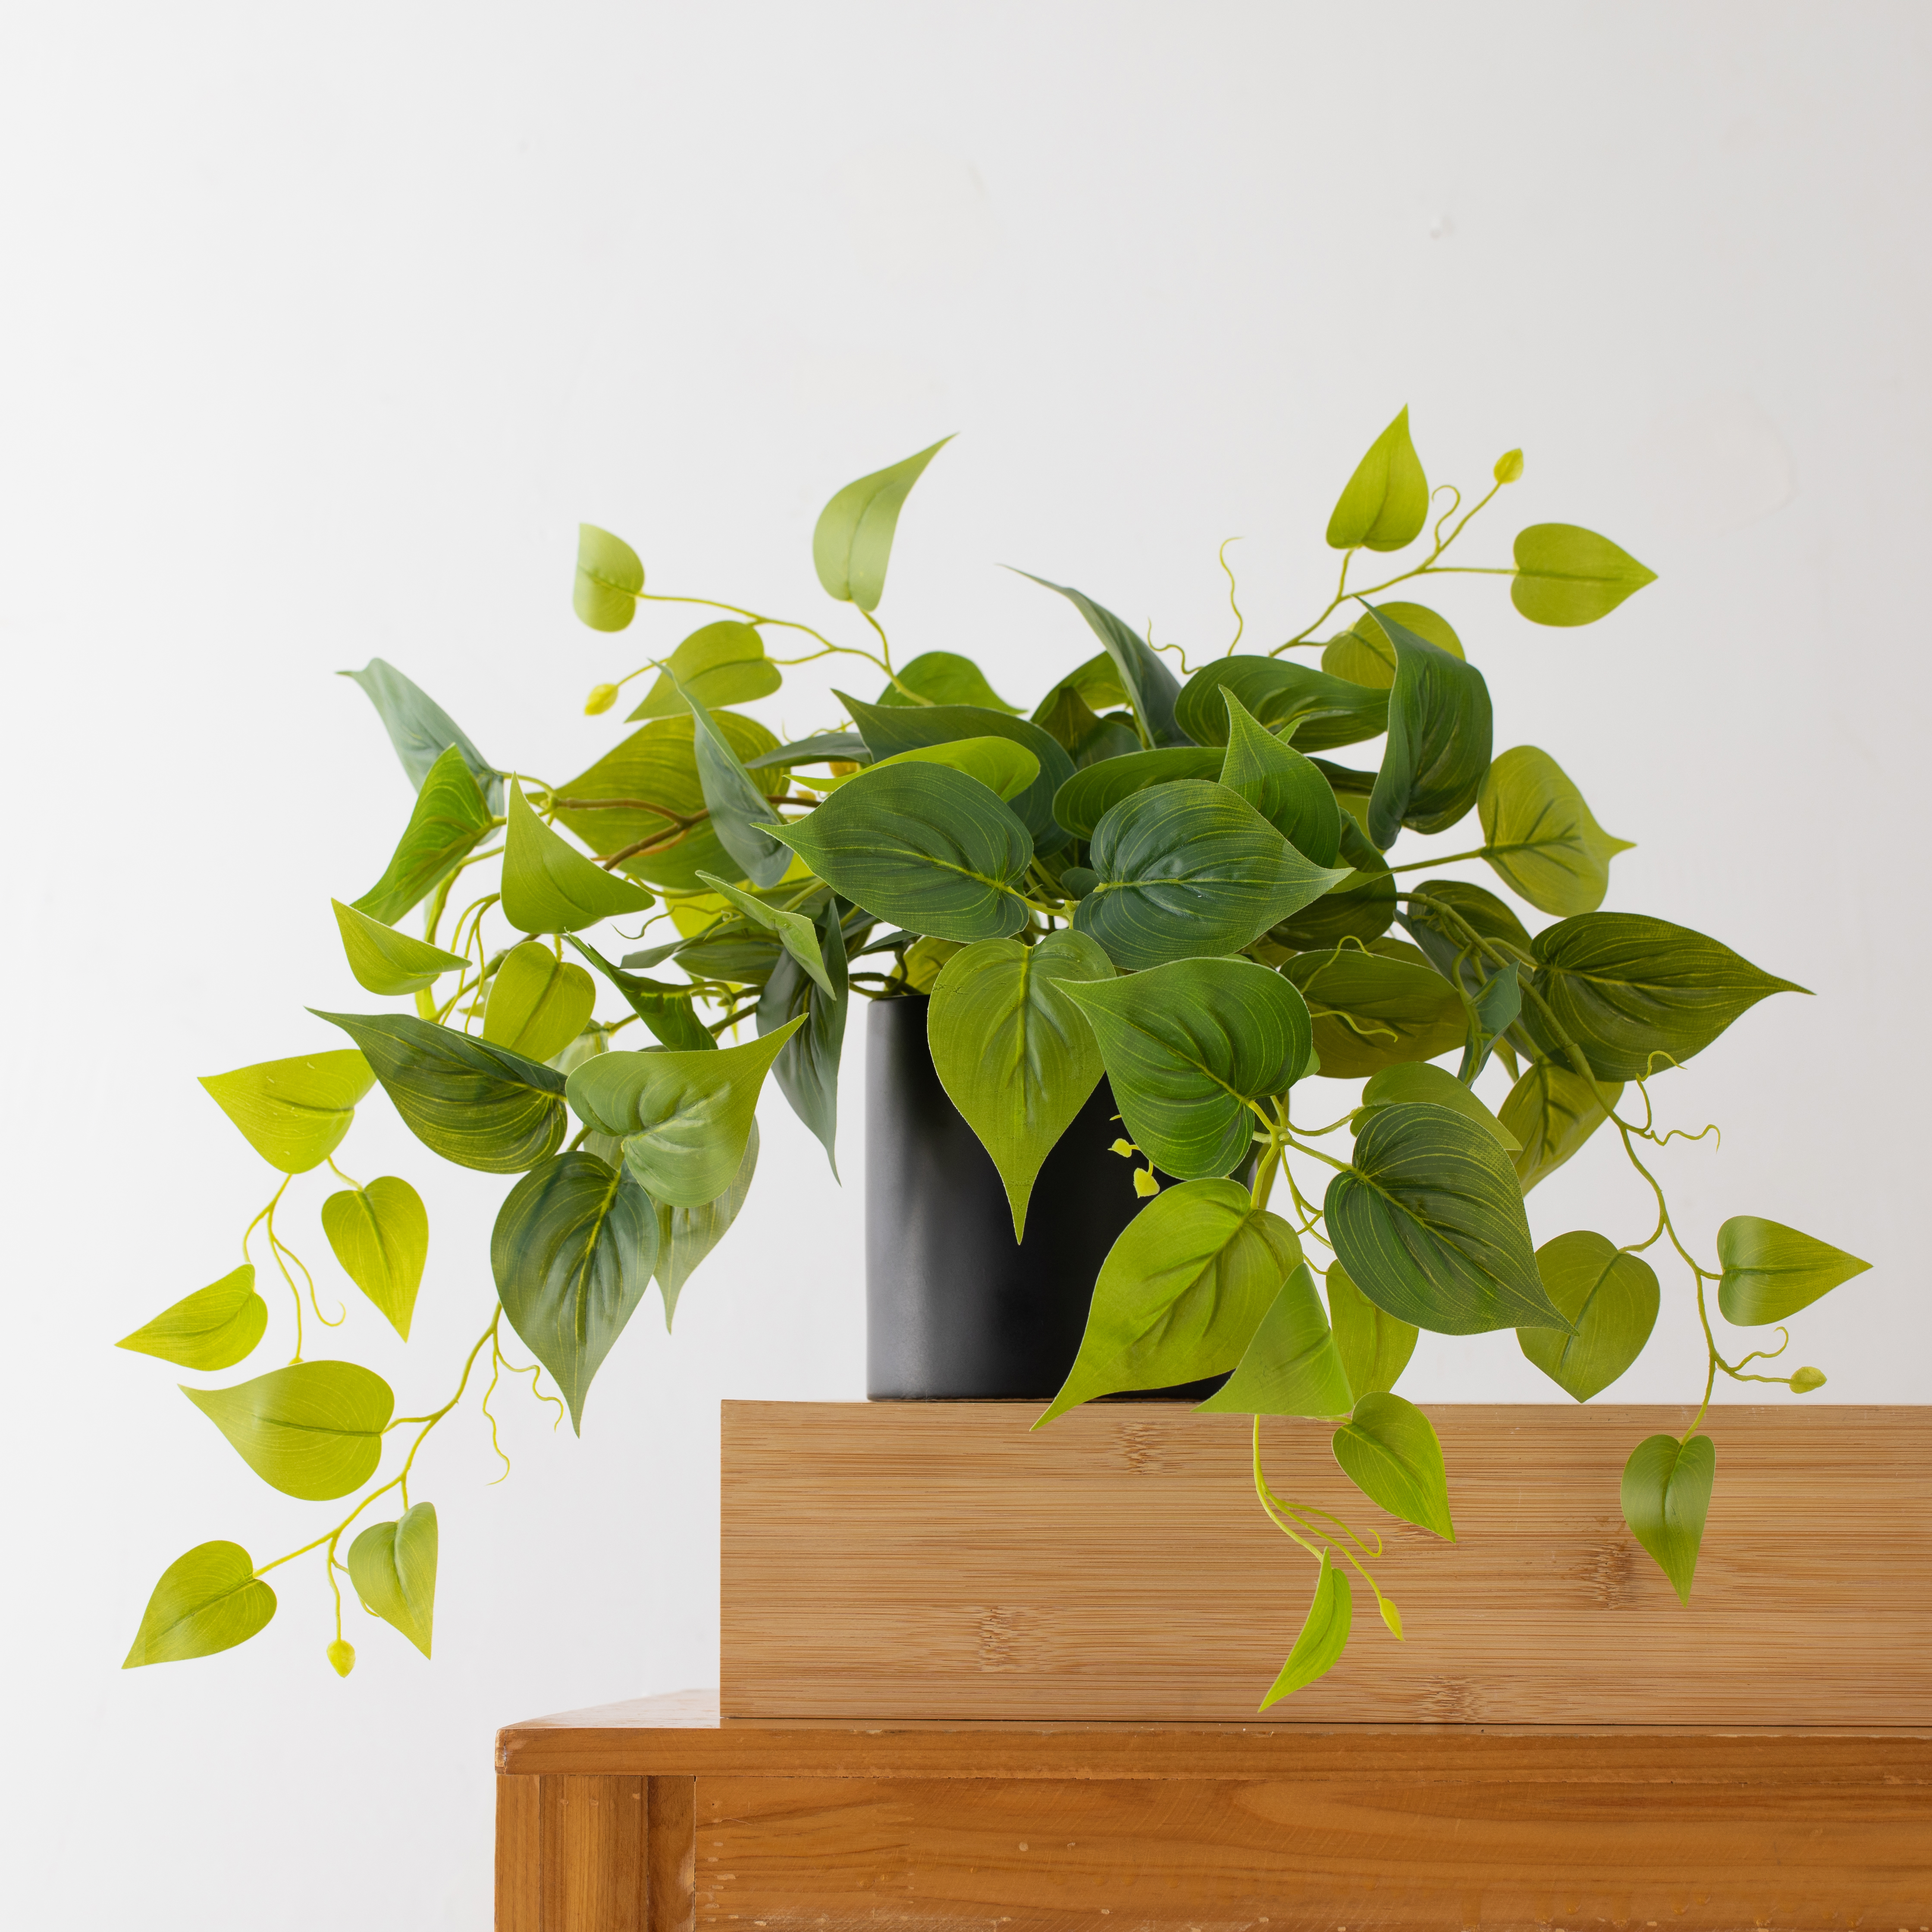 Faux Plants in Black Ceramic Pot, Artificial Plants for Home Decor Indoor,  Ivy Small Fake Plants - Fake Plants Decor, Green Plants Artificial Décor, Artificial  Plant for Indoor and Outdoor